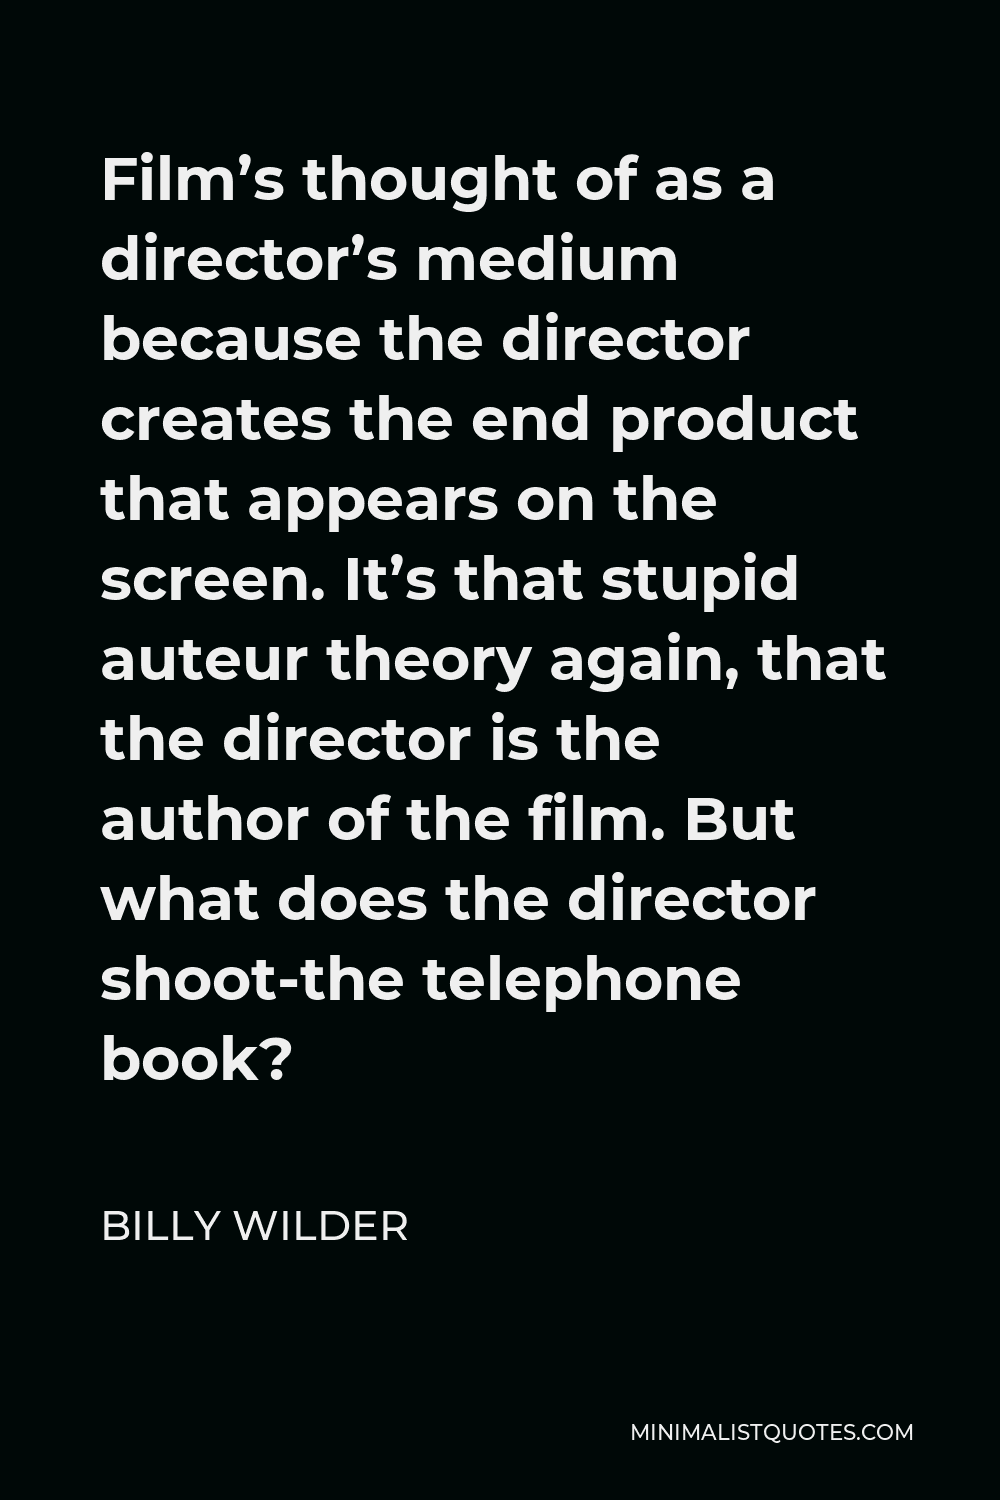 Billy Wilder Quote - Film’s thought of as a director’s medium because the director creates the end product that appears on the screen. It’s that stupid auteur theory again, that the director is the author of the film. But what does the director shoot-the telephone book?